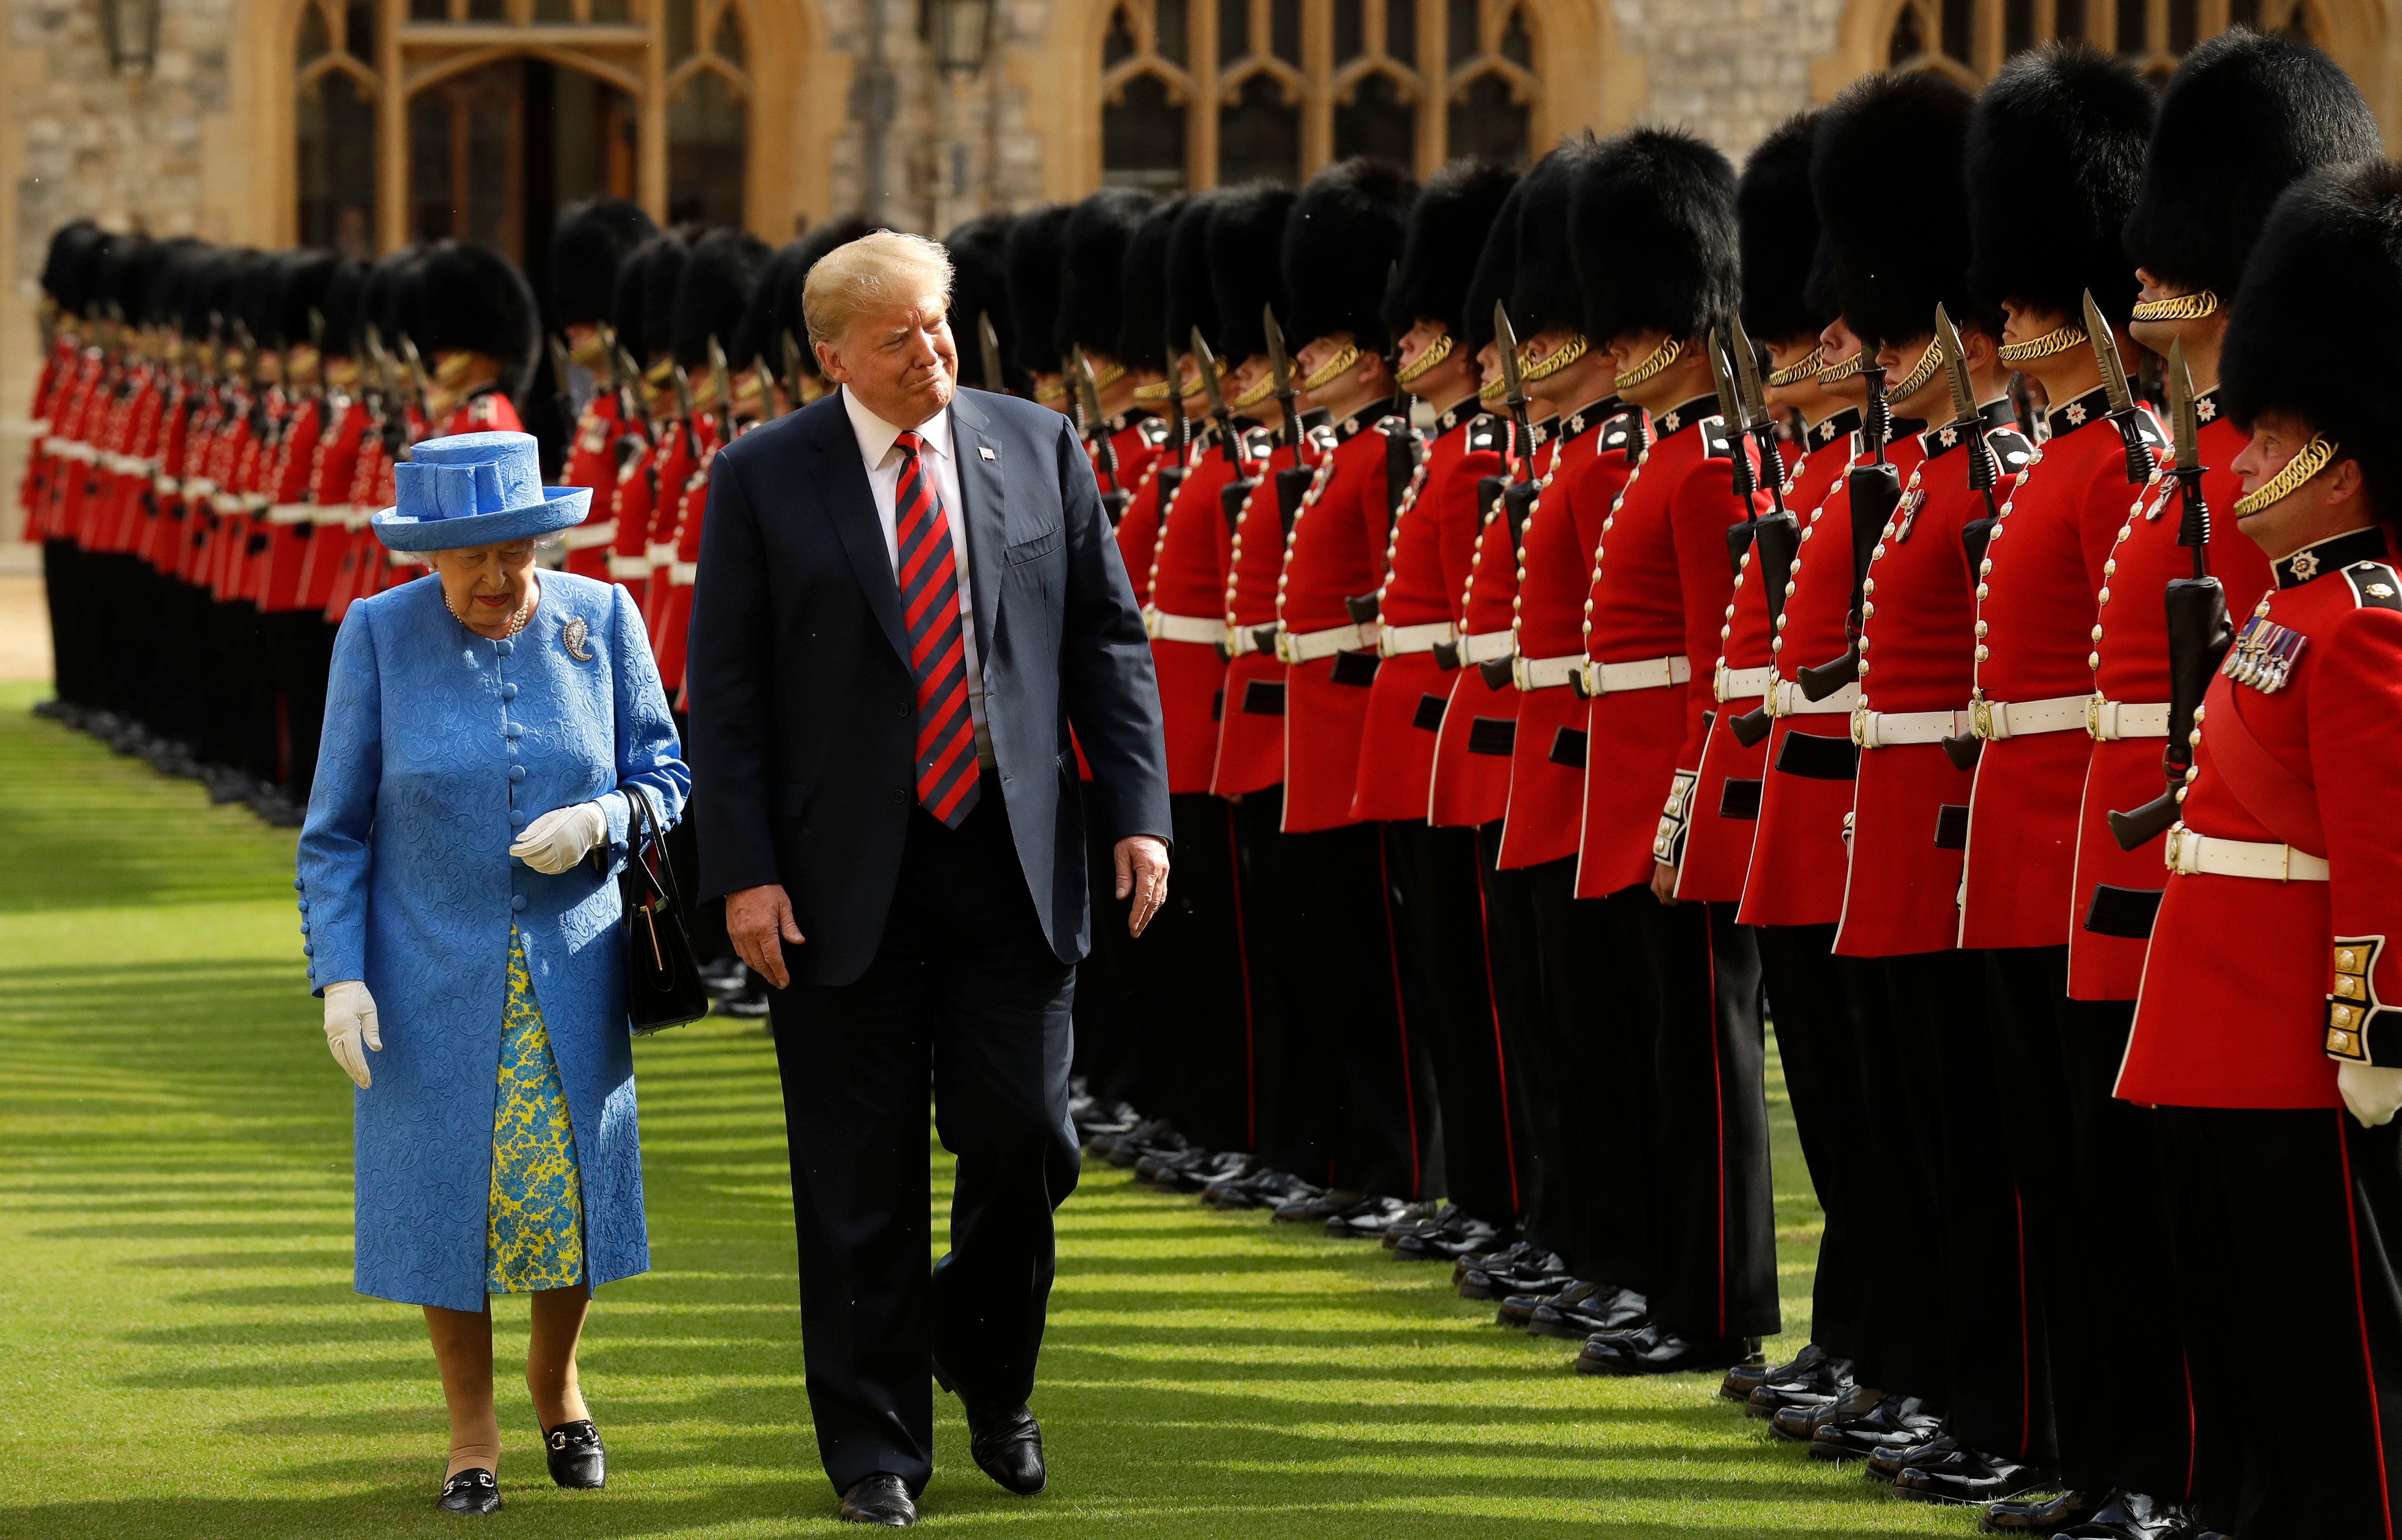 The Queen inspects a guard of honour with Donald Trump in 2018